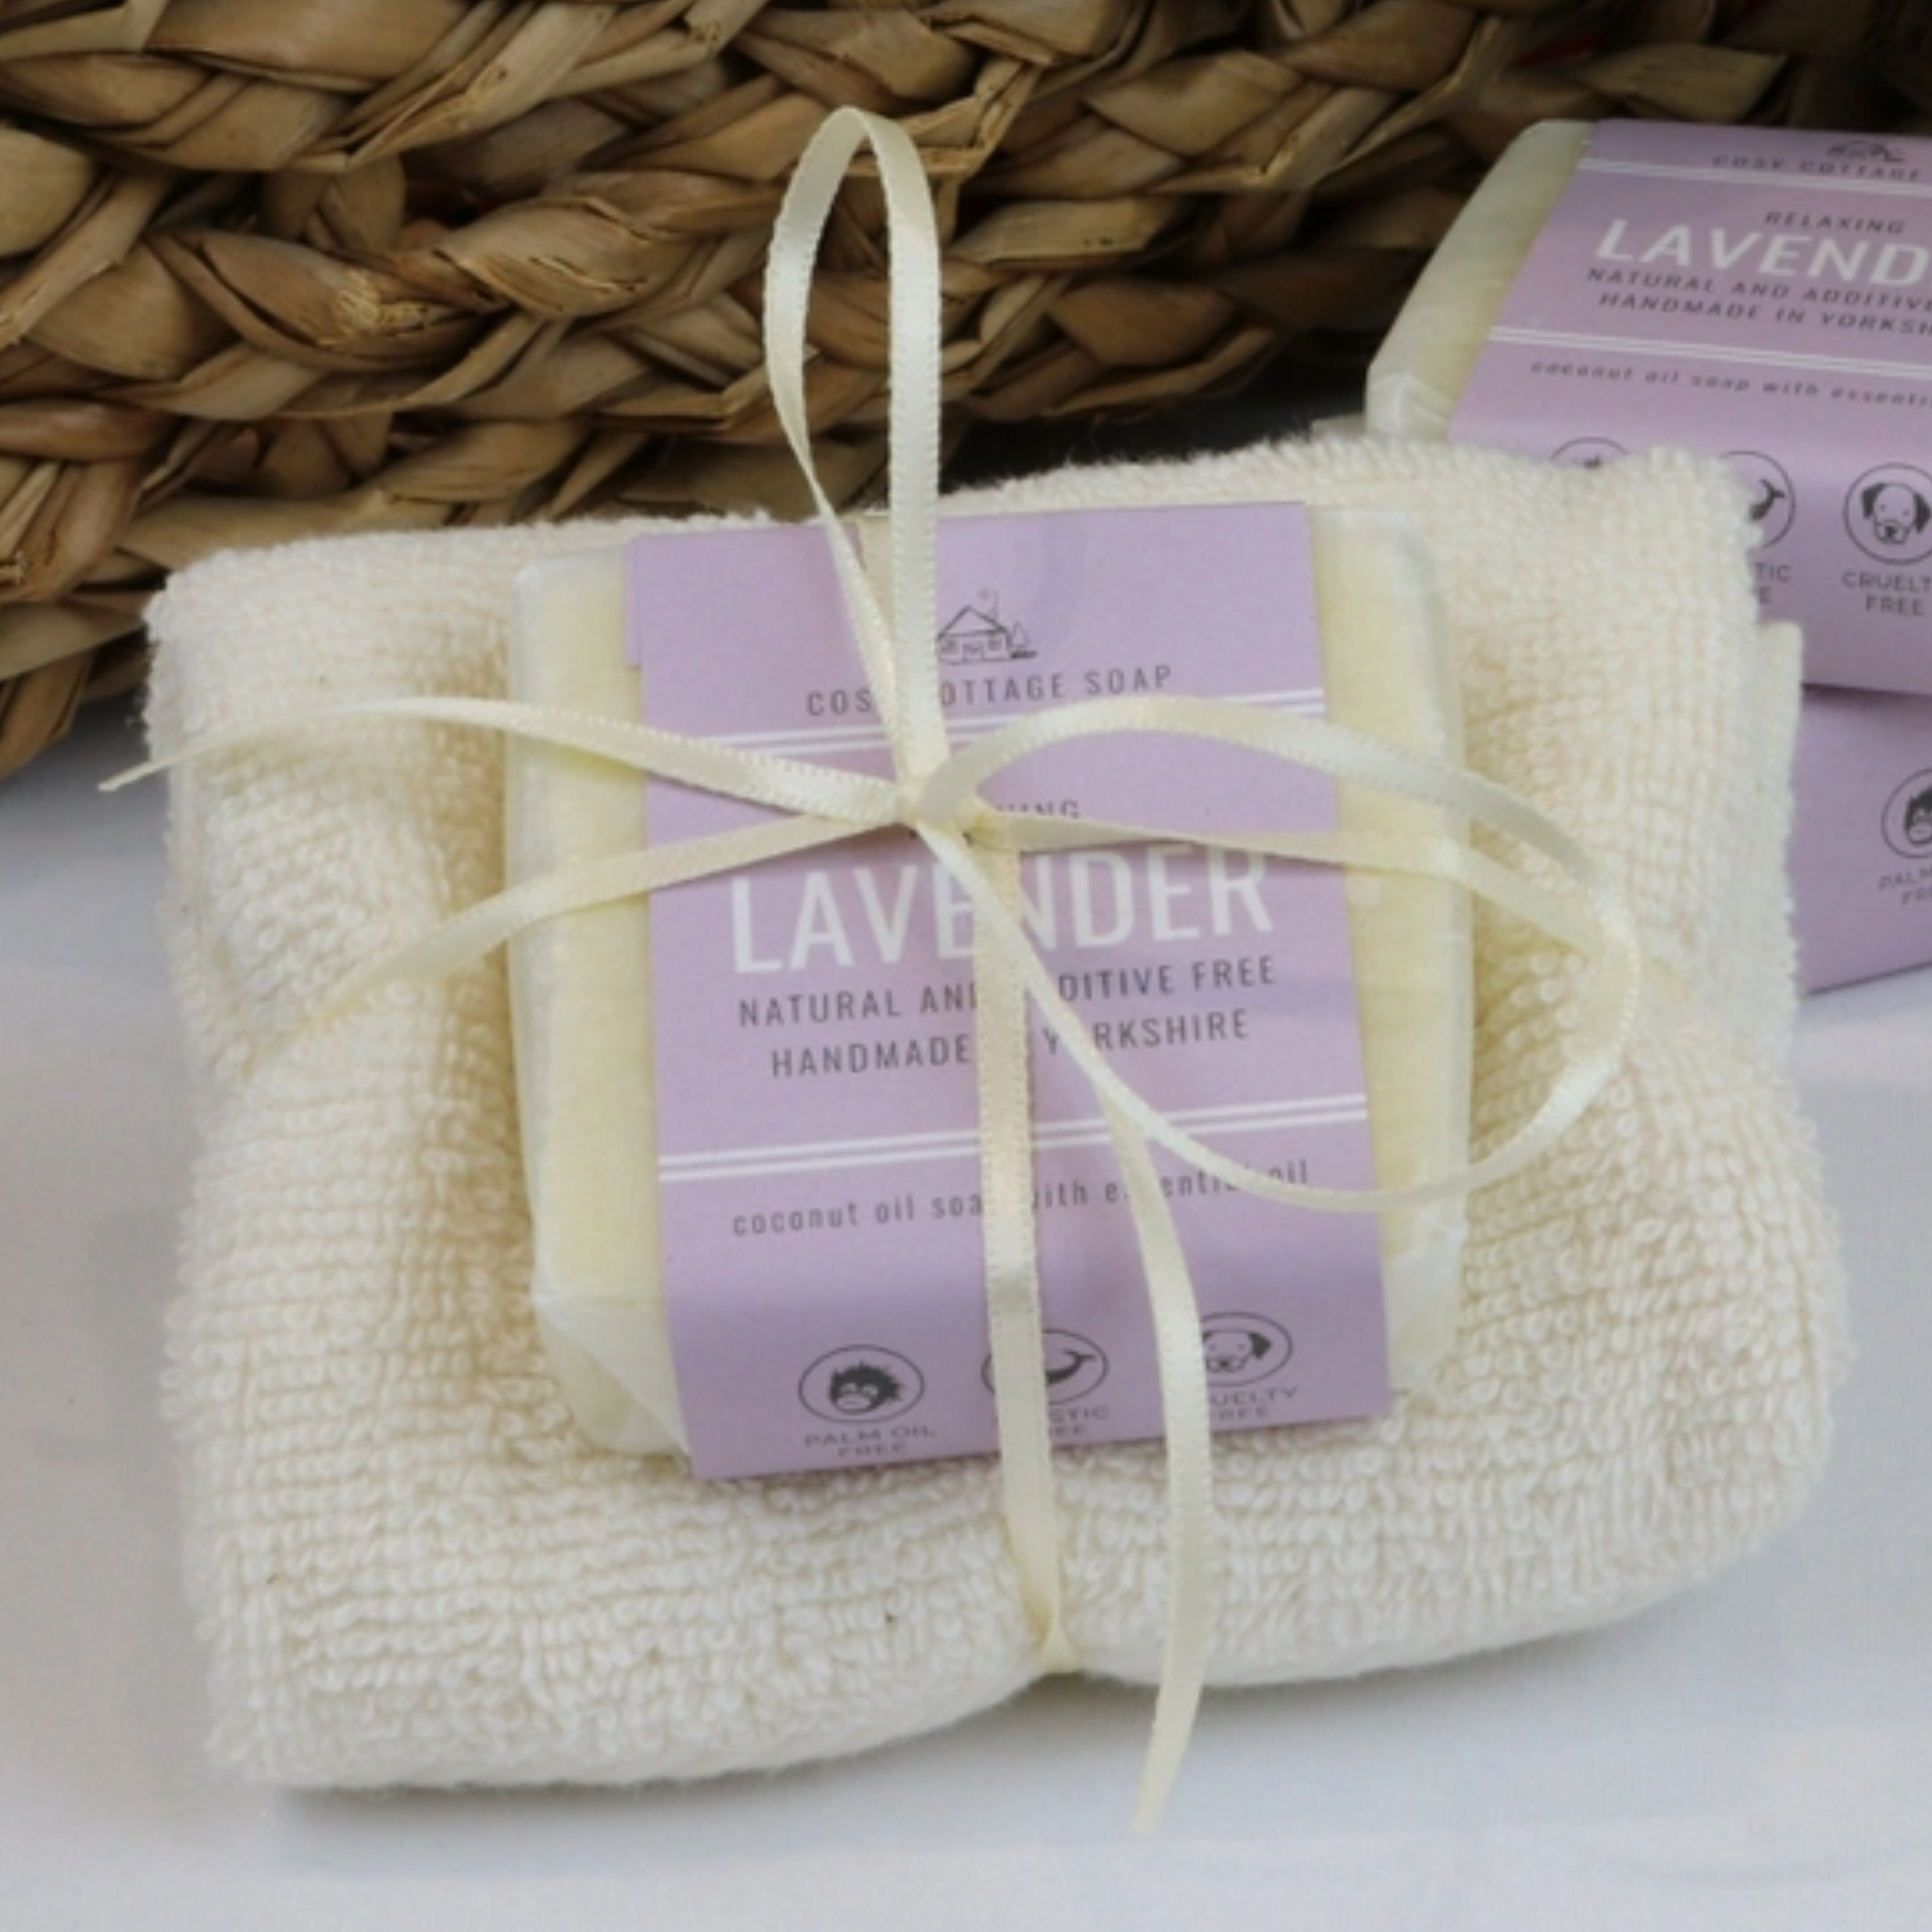 Soap and Face Cloth Gift Set - Lavender - Self-Care Gift Sets - Cosy Cottage - Bliss Bathroom Supplies -